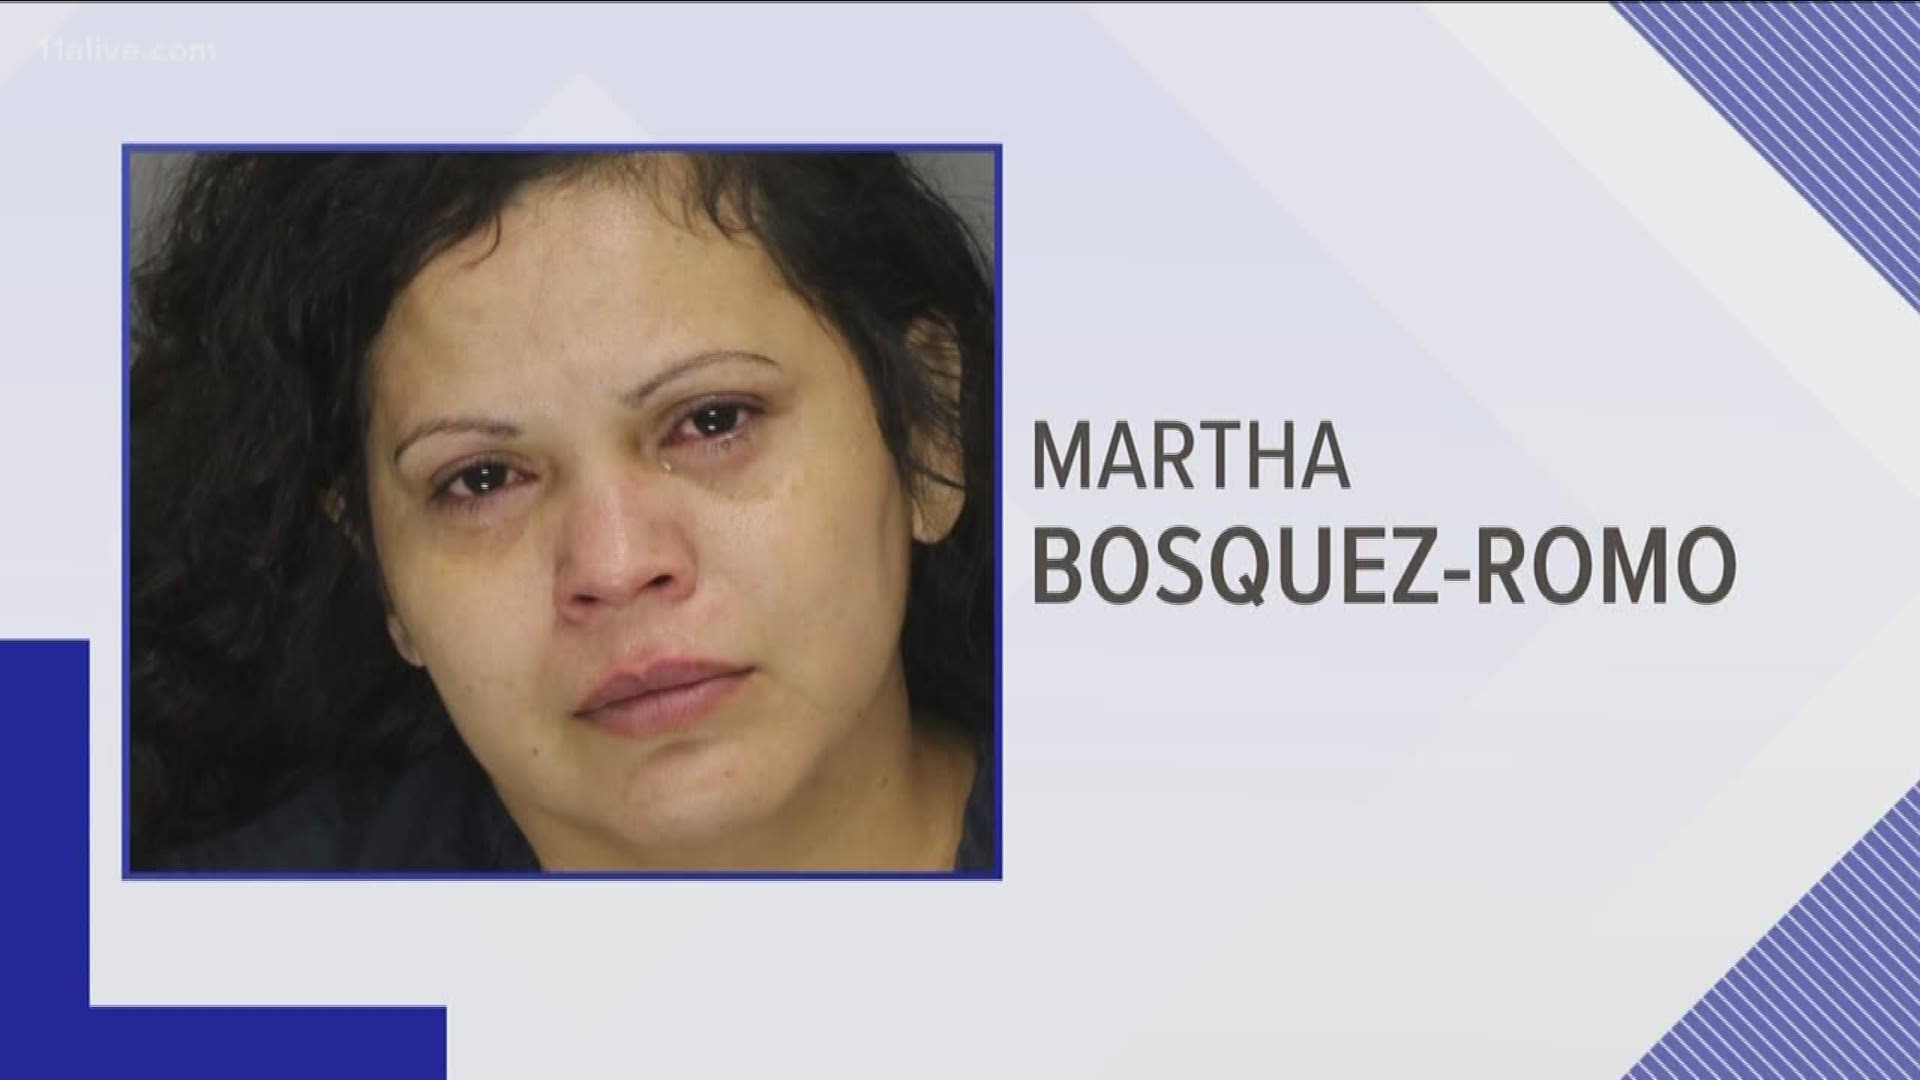 She allegedly drove down the wrong side of a major Marietta road with no headlights on with an open container. Authorities said she also had her infant son in the back seat.